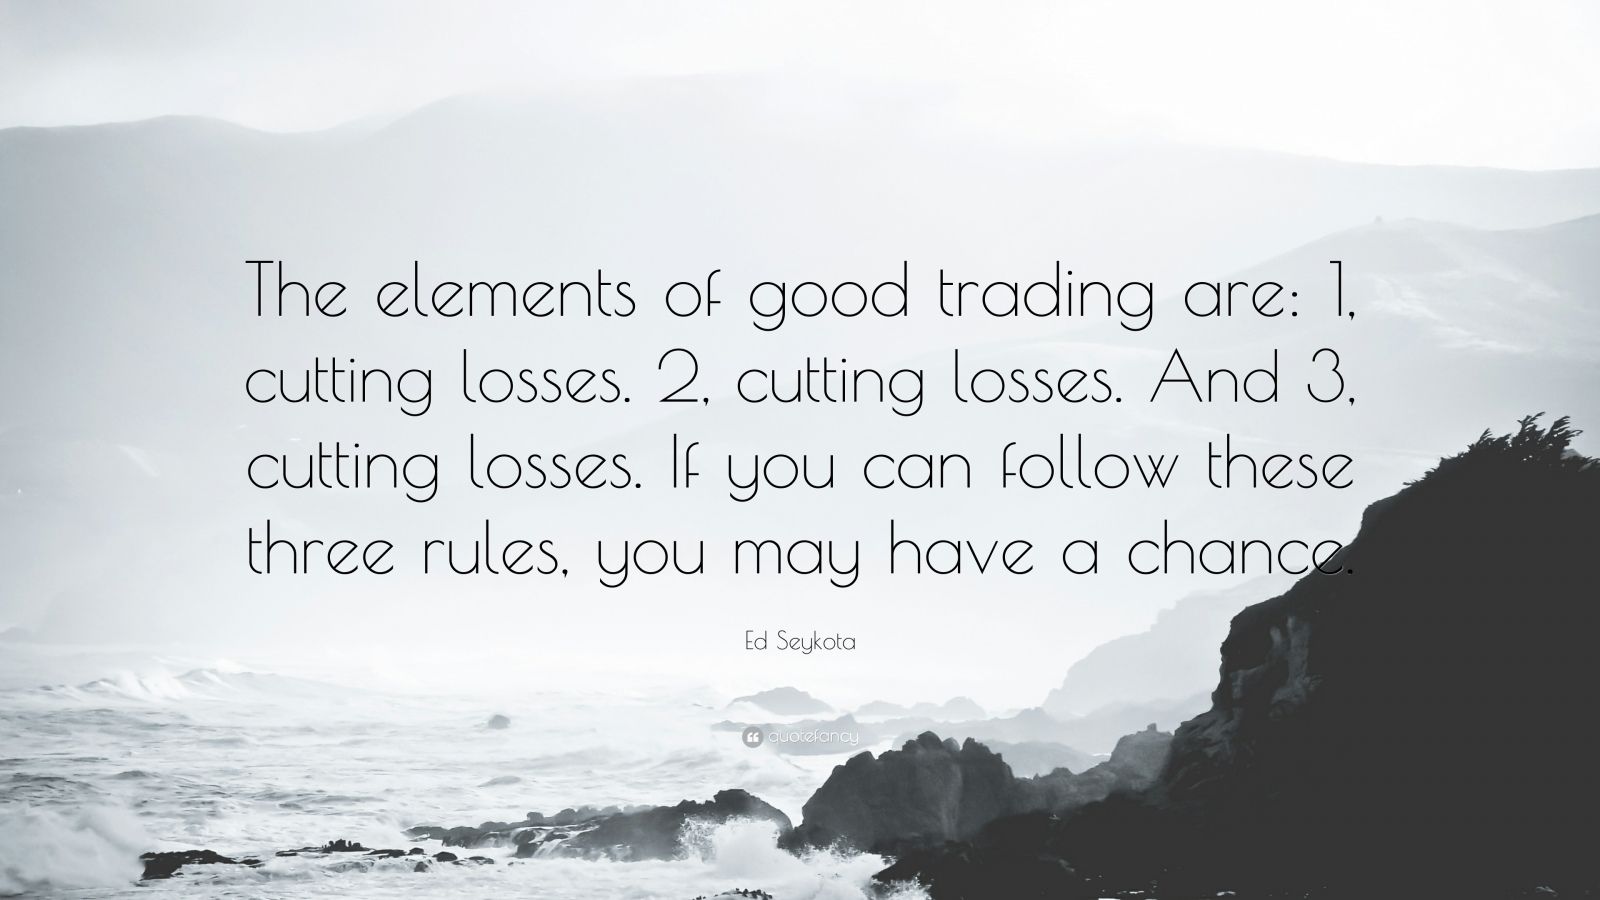 Ed Seykota Quote “The elements of good trading are 1